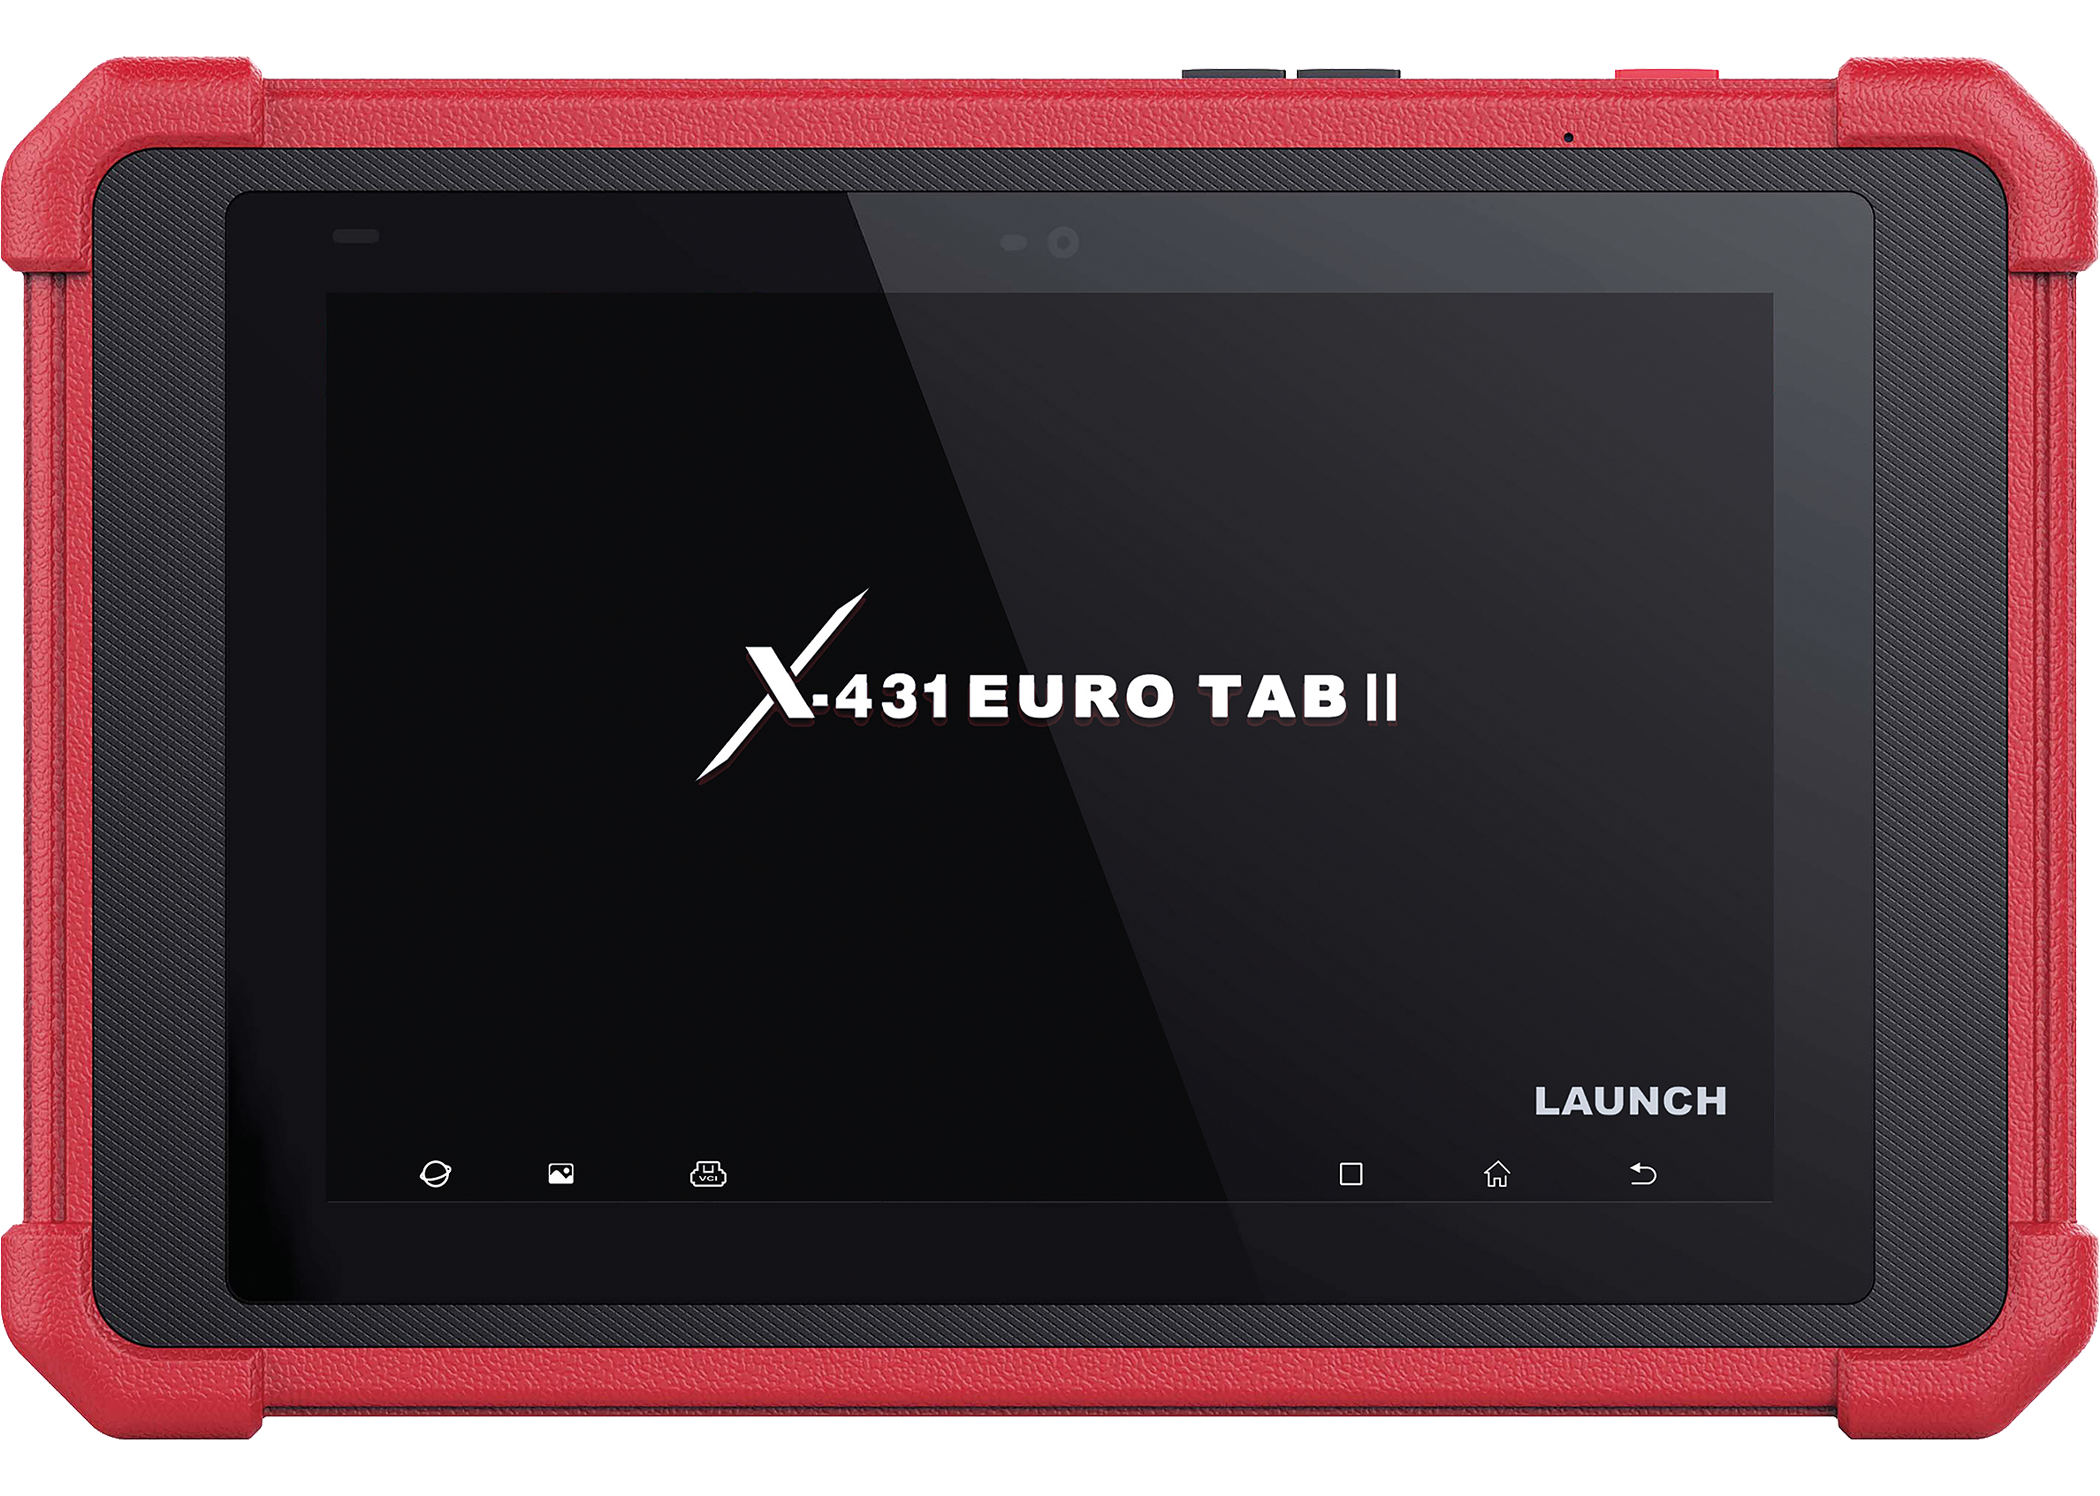 LAUNCH-Europe-X-431-Euro-Tab-2-front